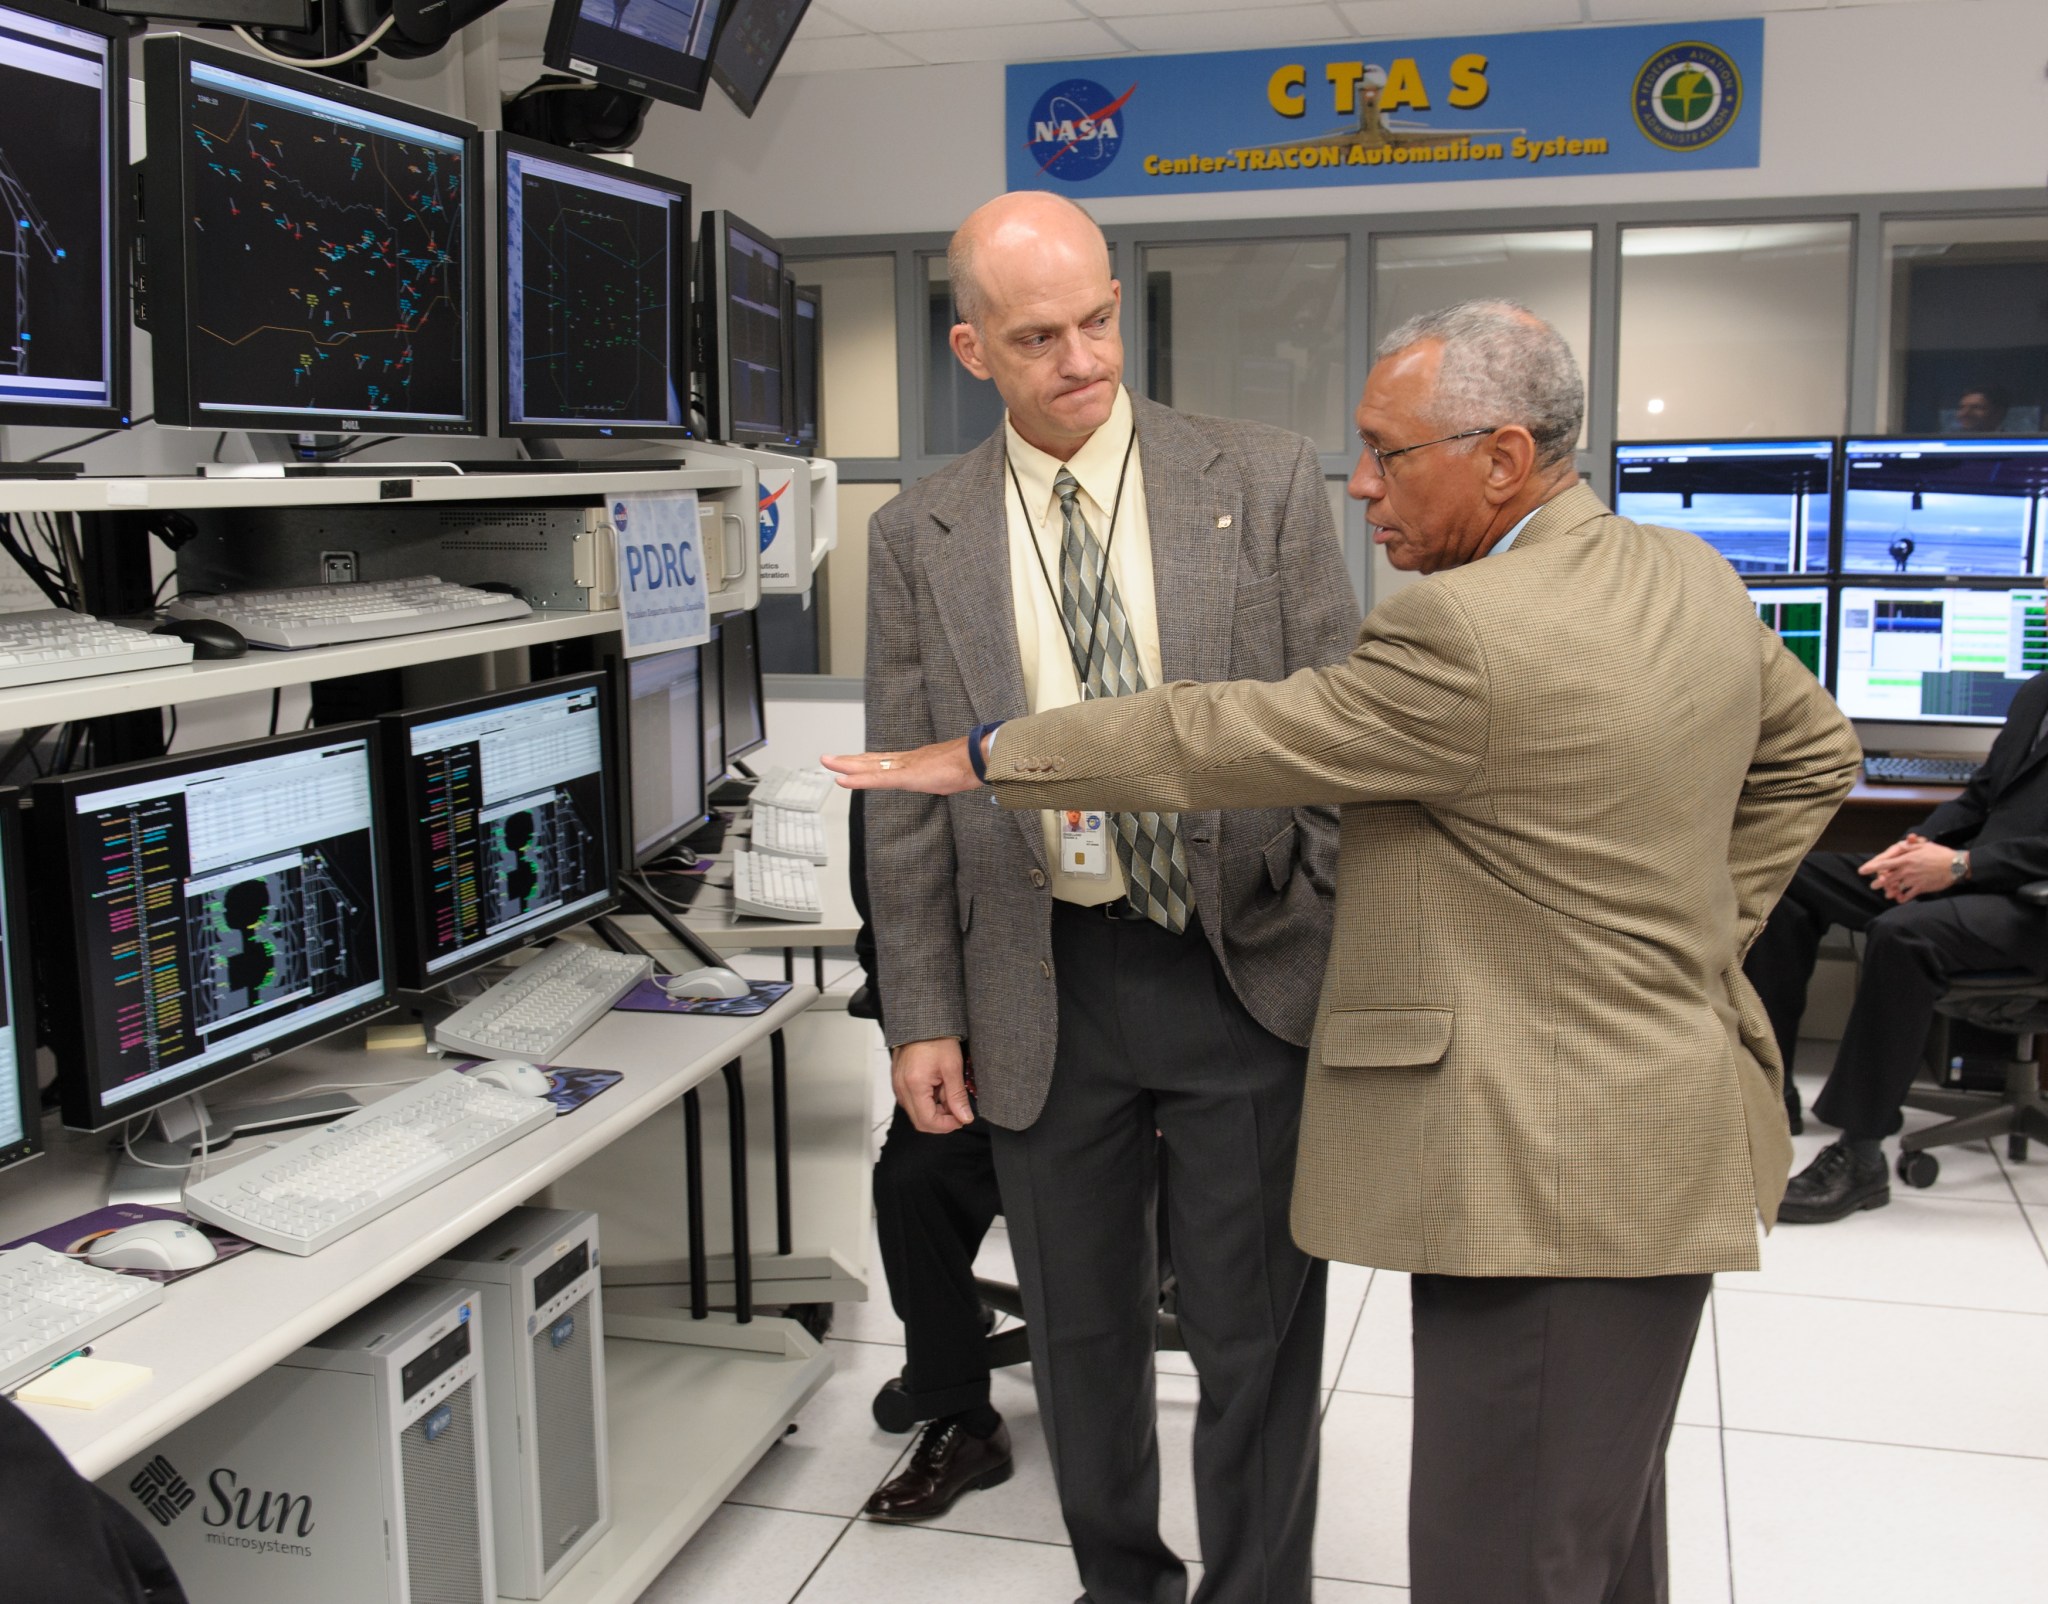 NASA Administrator Charlie Bolden talking to a man and pointing to a monitor.